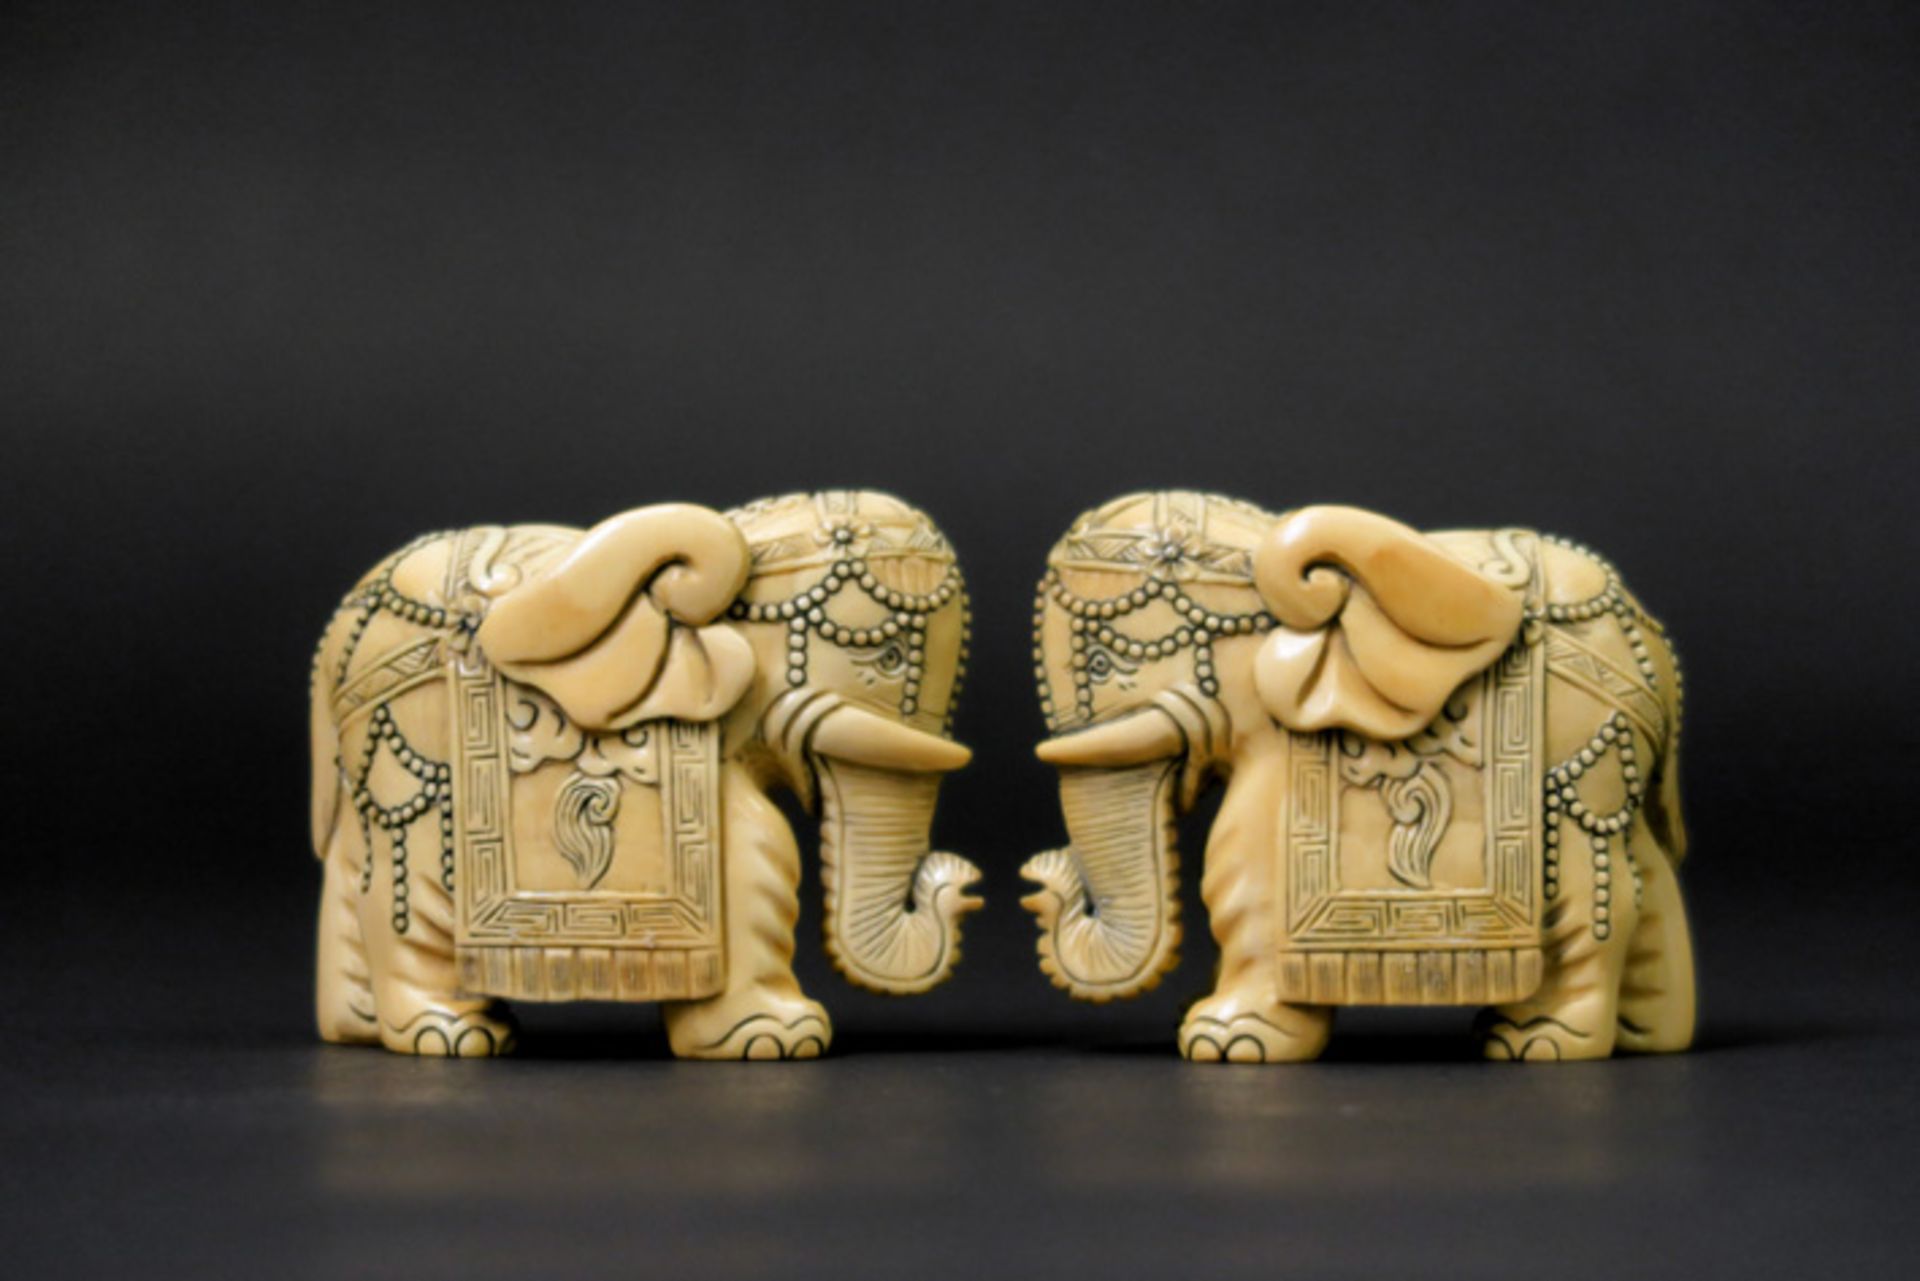 pair of small antique Chinese "Ornated elephant" sculptures in ivory Paar antieke kleine Chinese